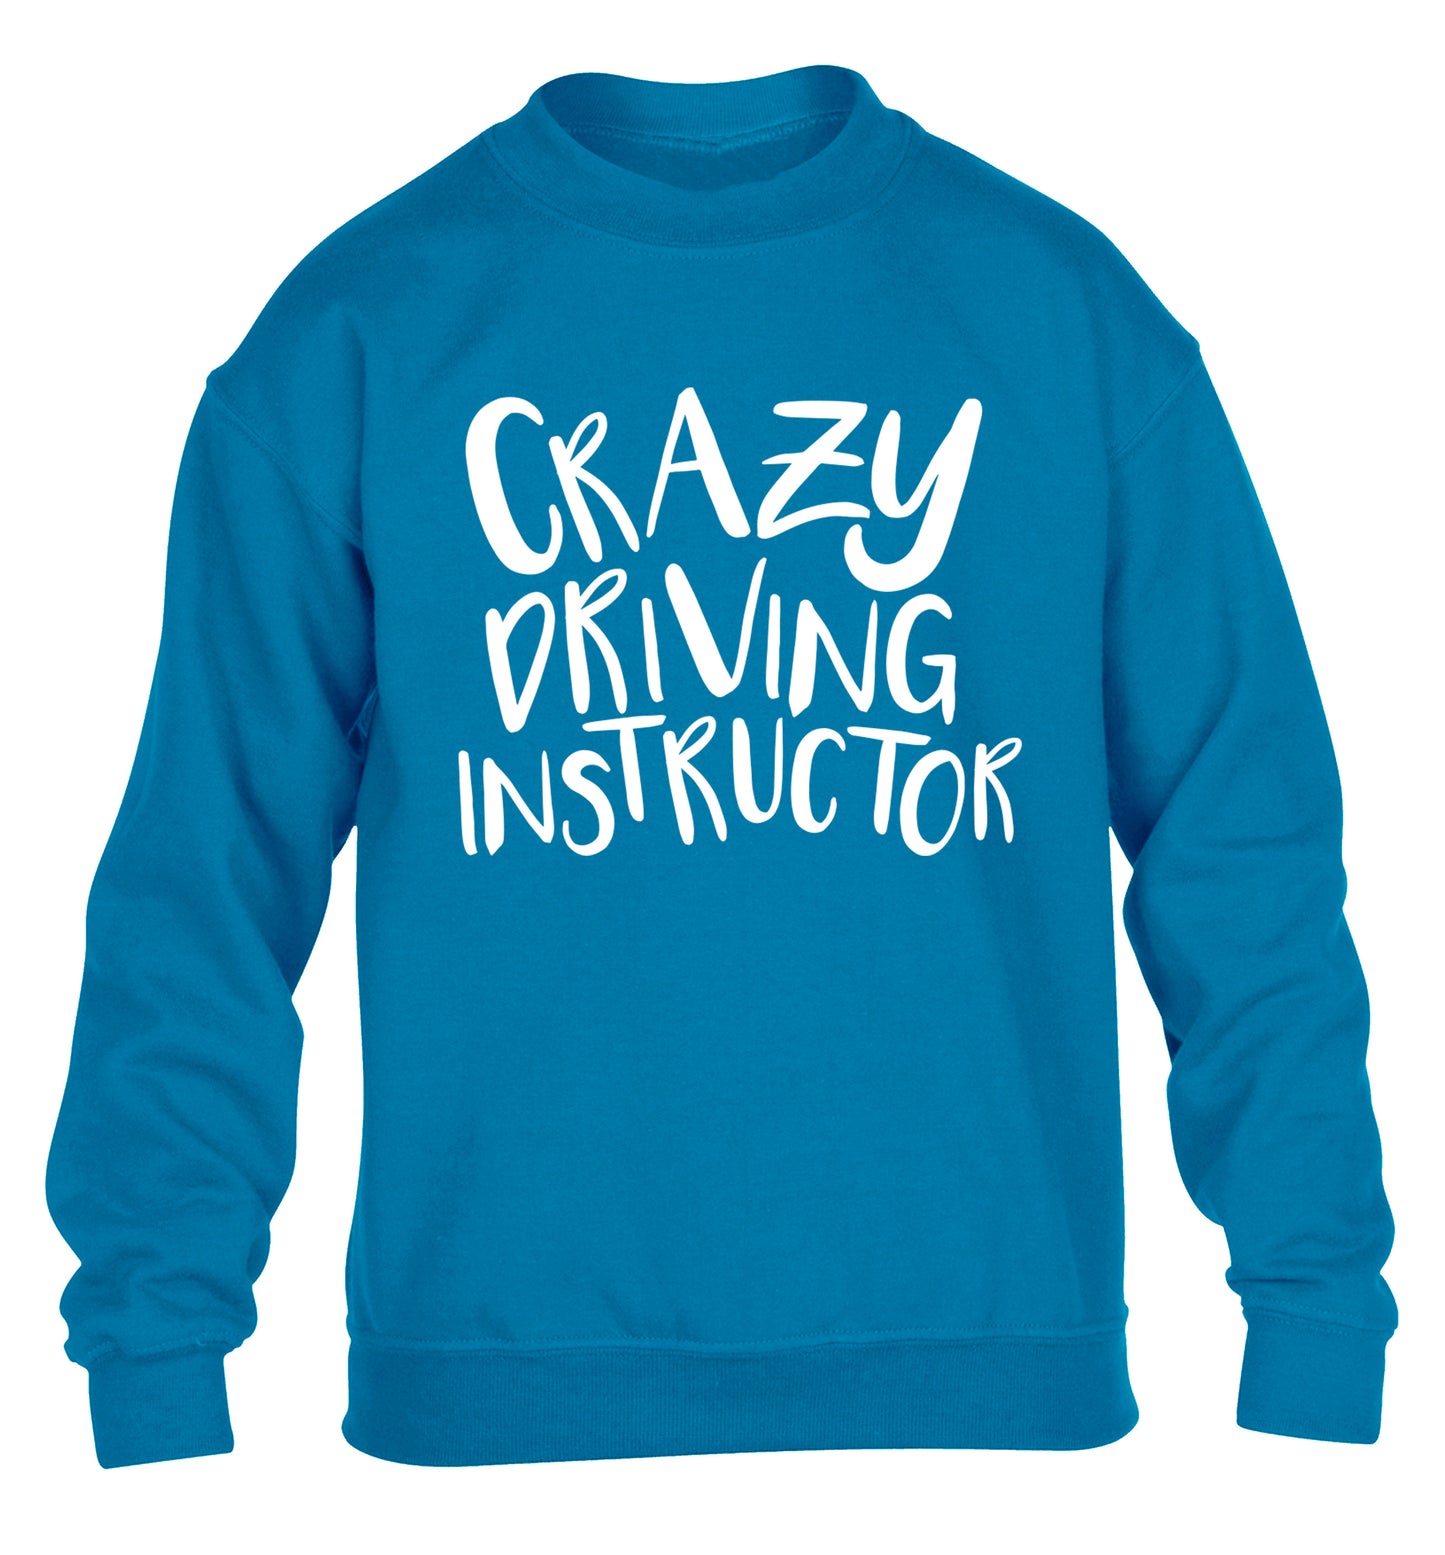 Crazy driving instructor children's blue sweater 12-13 Years